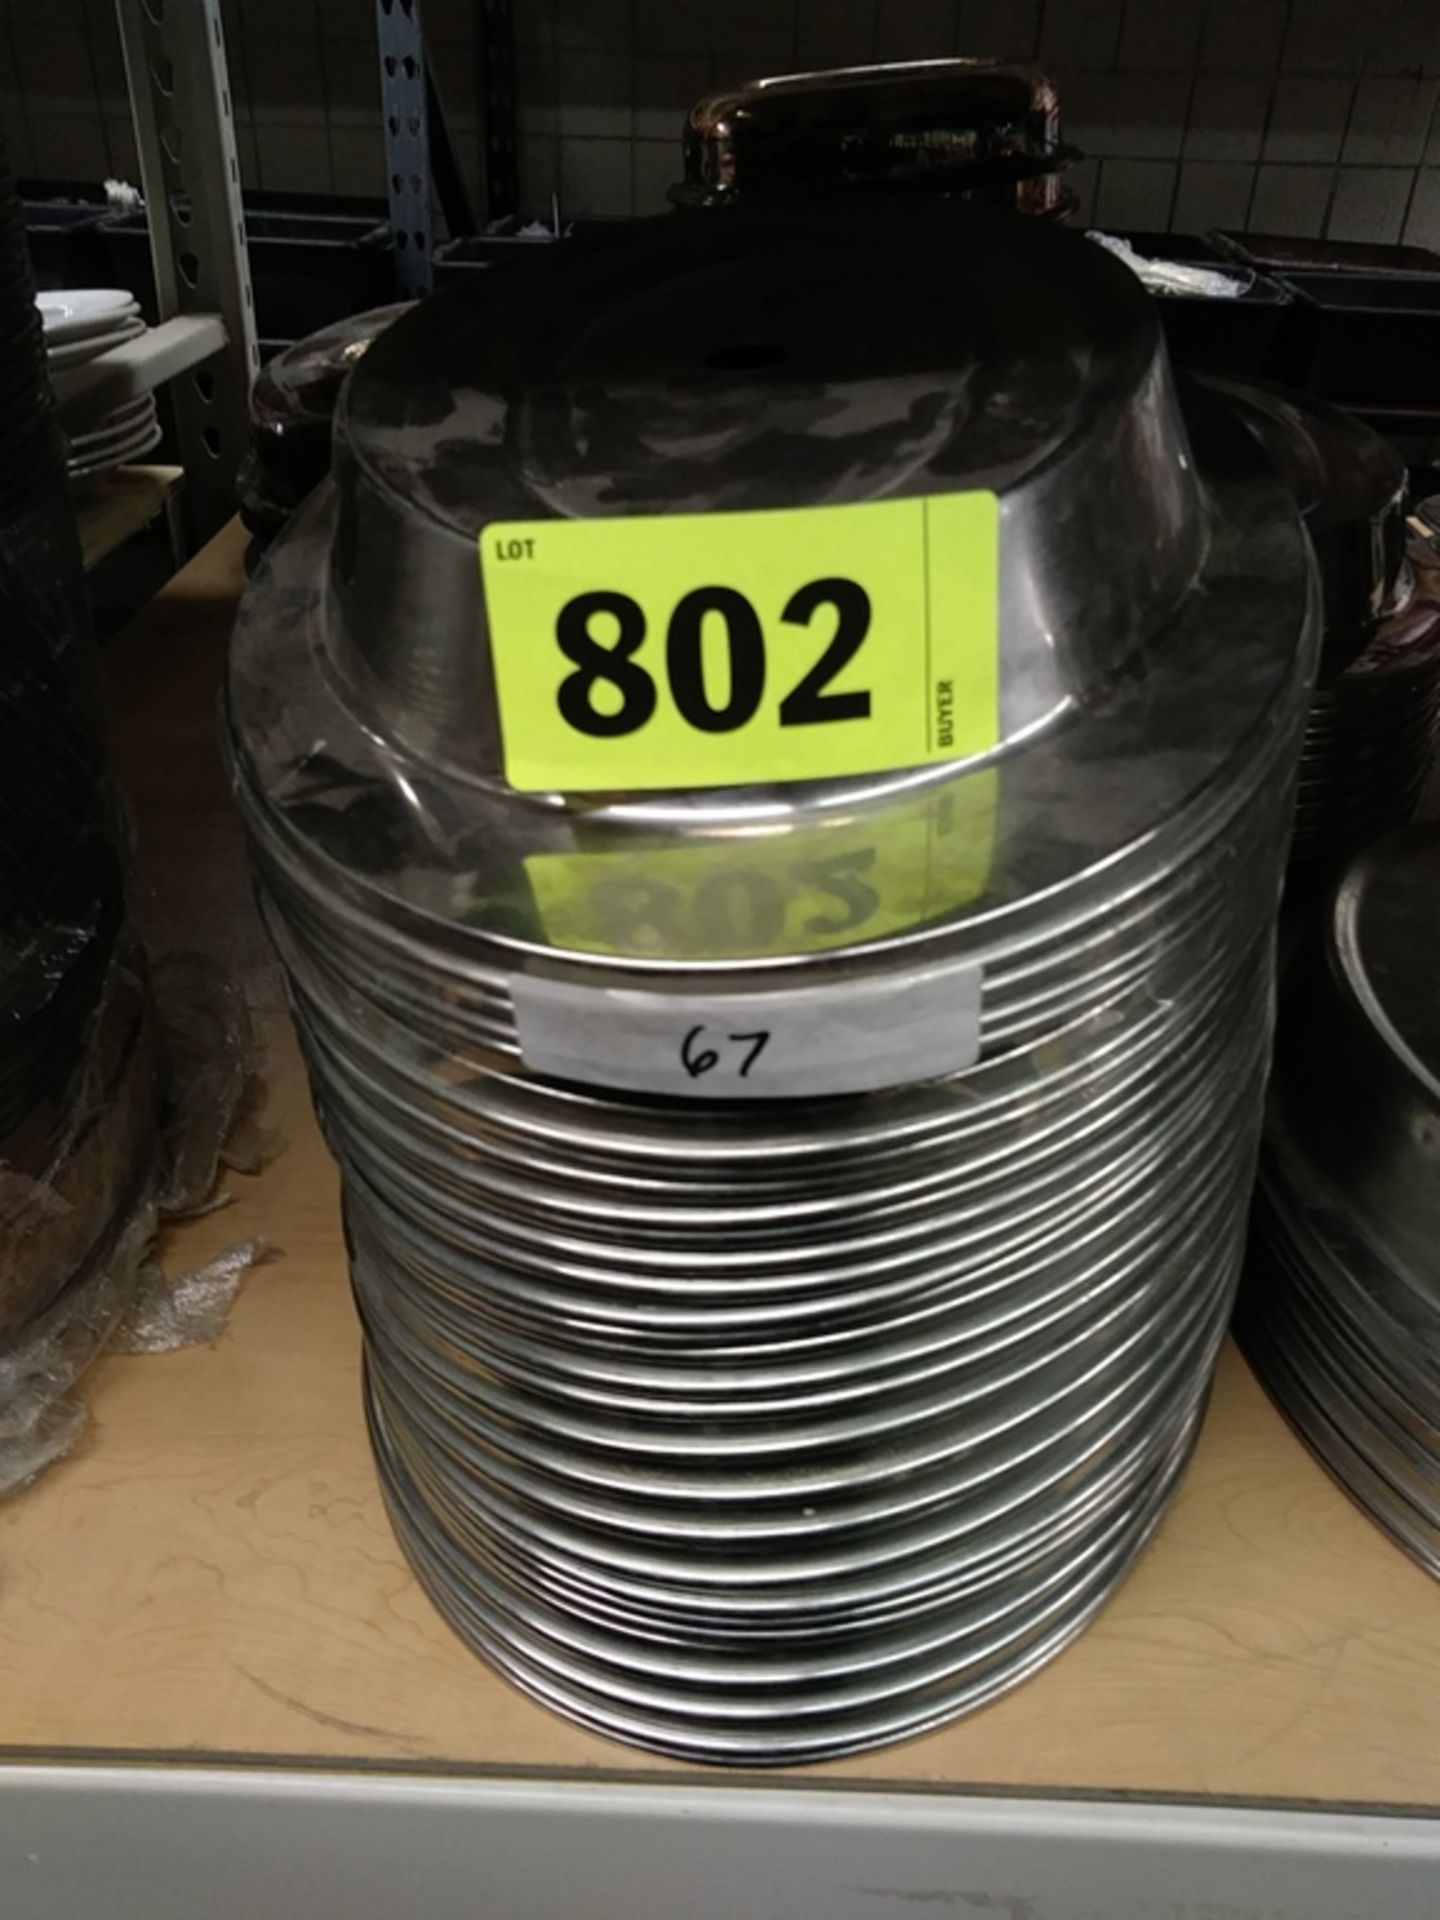 12" X 17" OVAL STAINLESS STEEL PLATE COVERS (INCLUDES QTY: 67) - Image 4 of 4